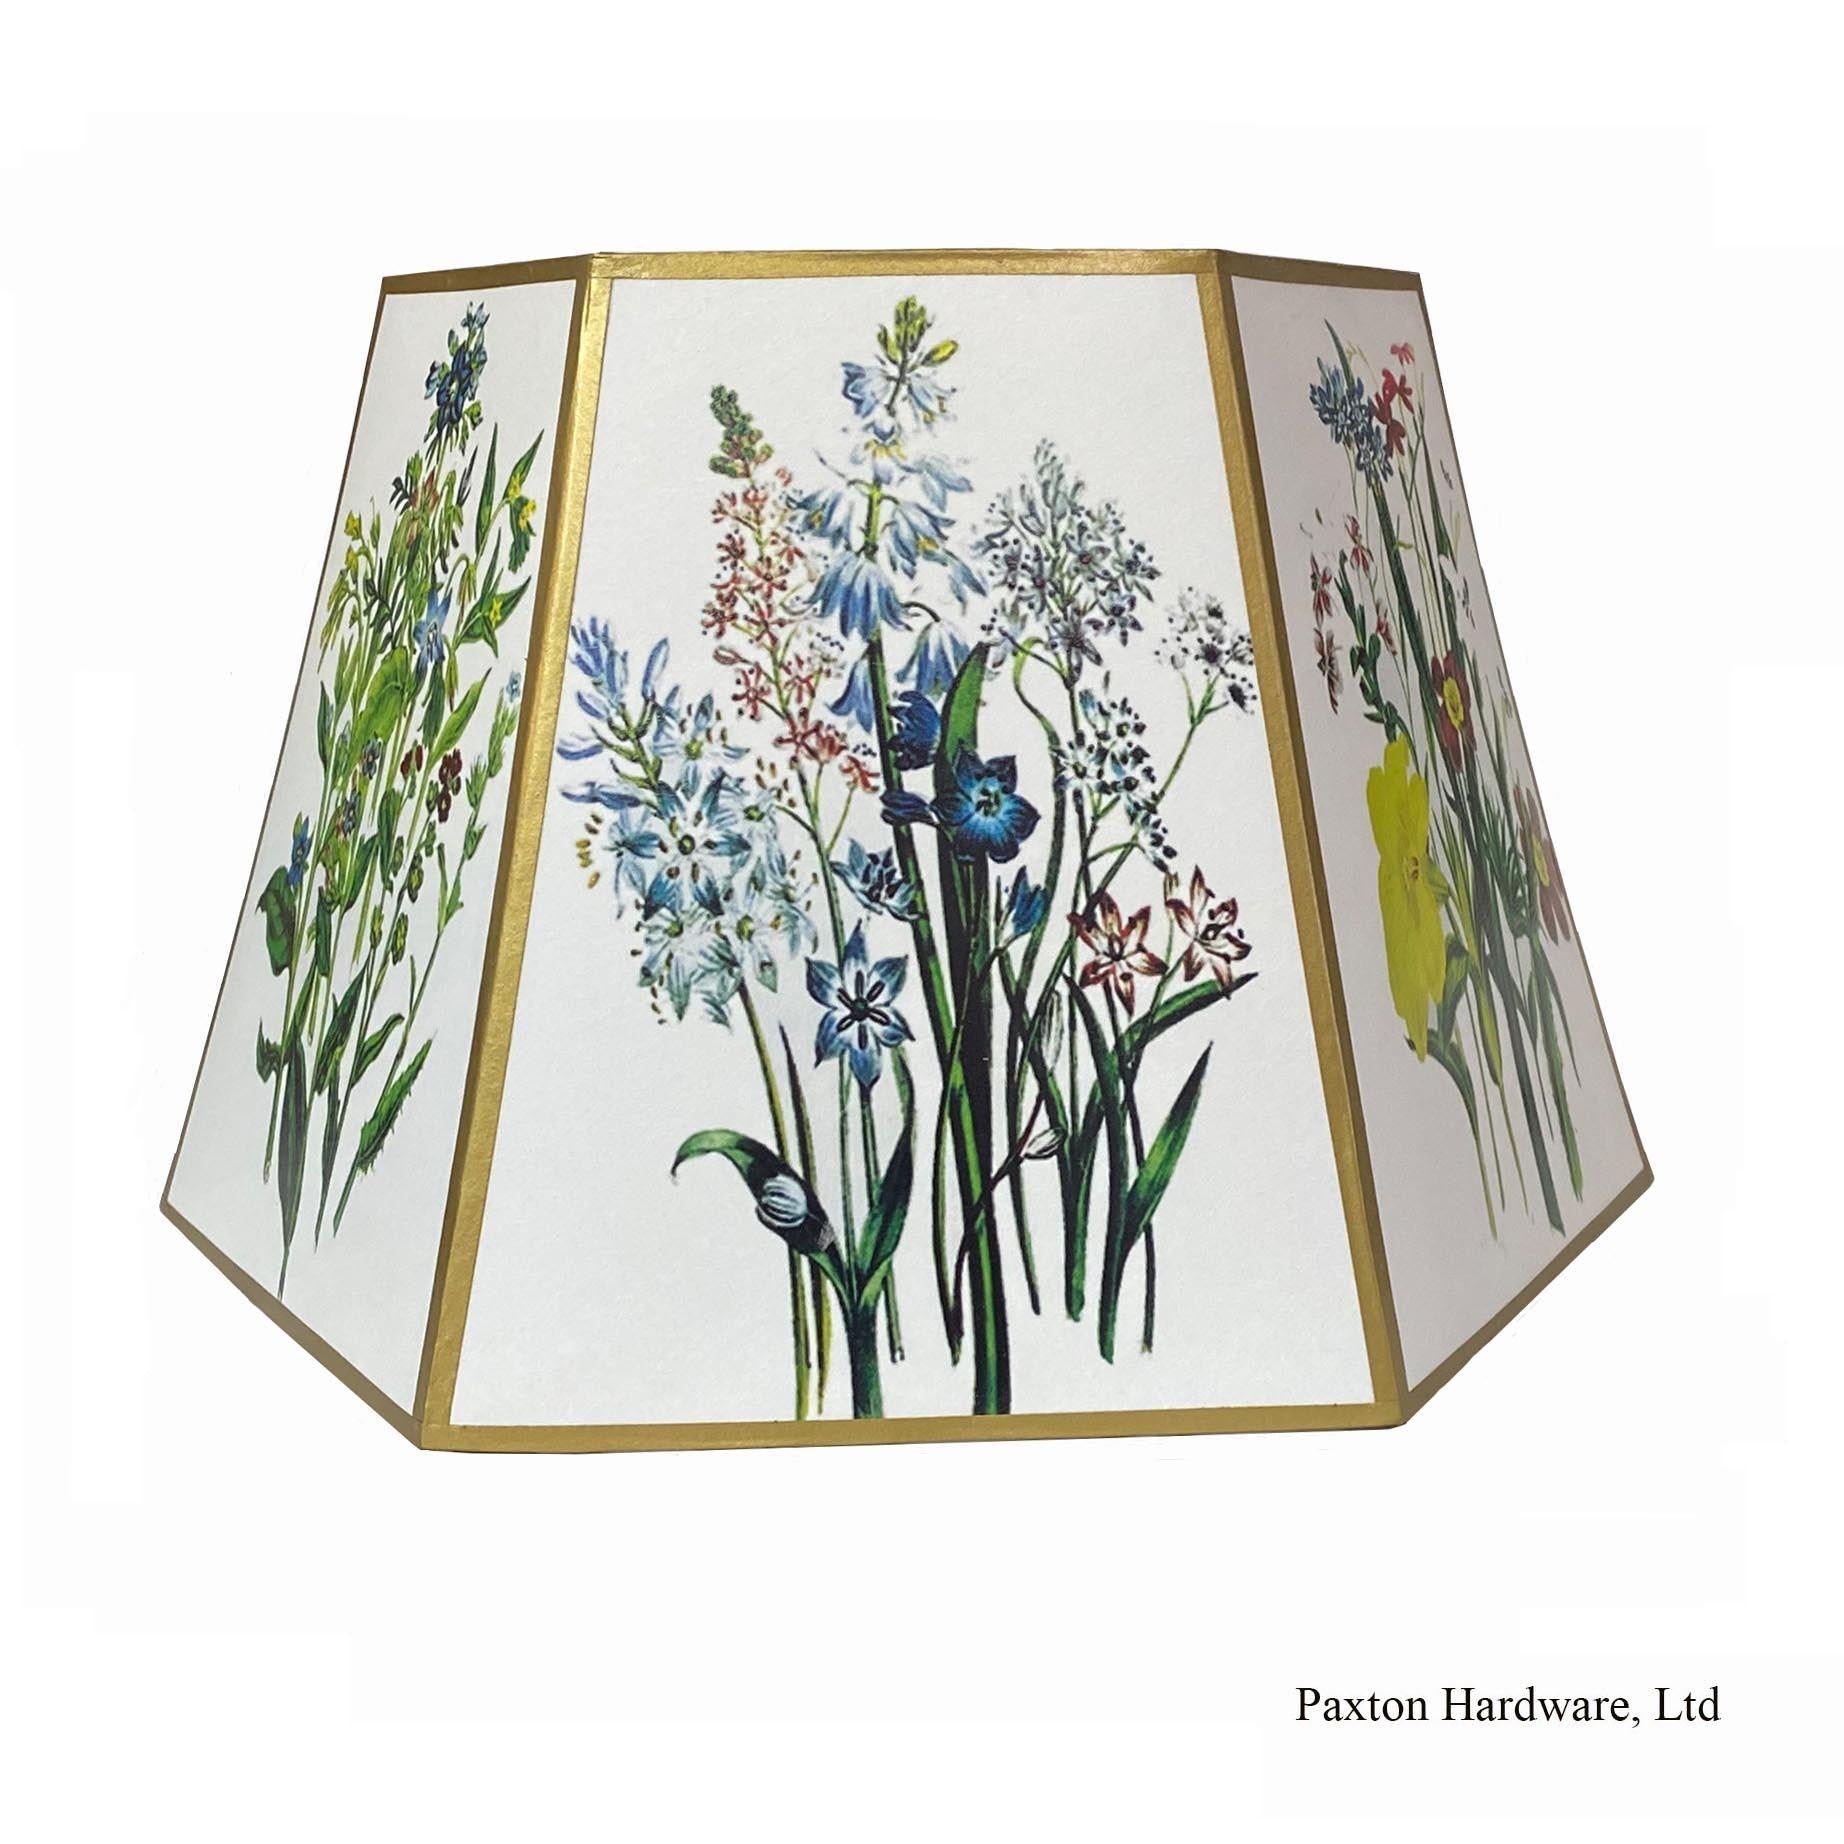 Lamp Shade with bouquets of flowers, paxton hardware